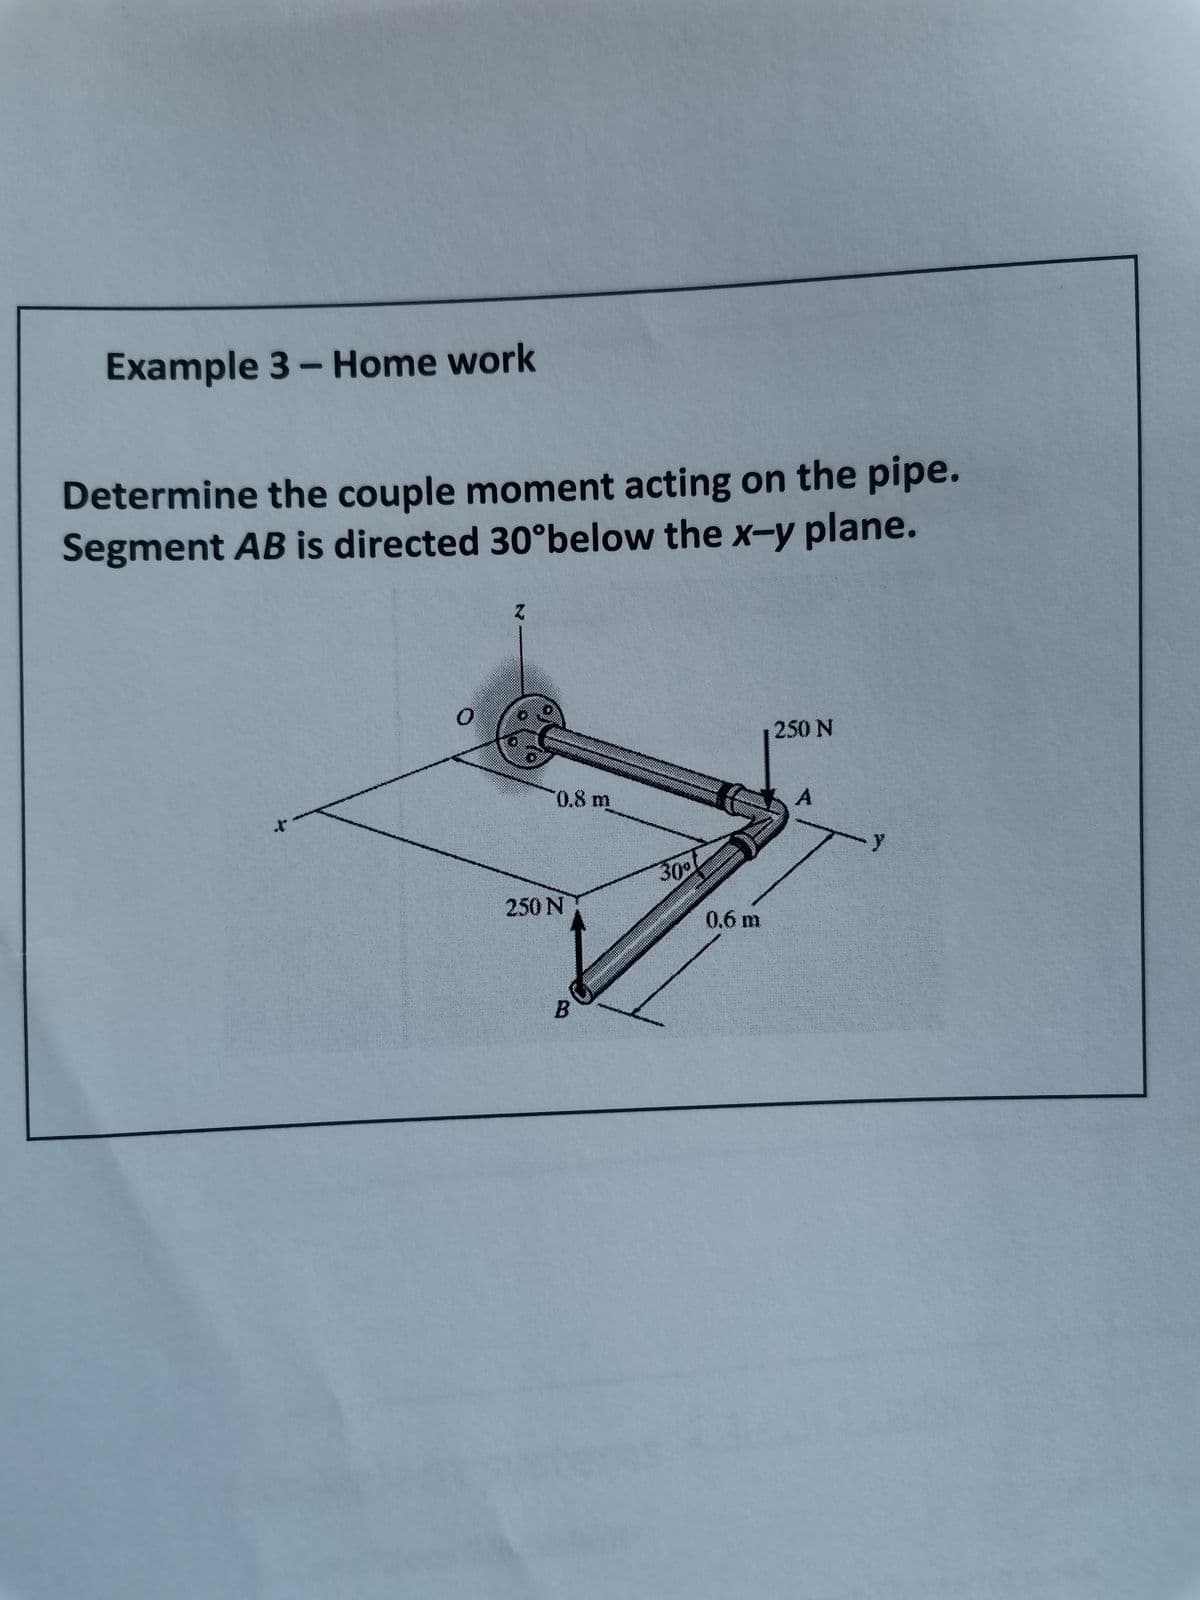 Example 3- Home work
Determine the couple moment acting on the pipe.
Segment AB is directed 30°below the x-y plane.
250 N
0.8m
30
250 N
0.6 m
B
